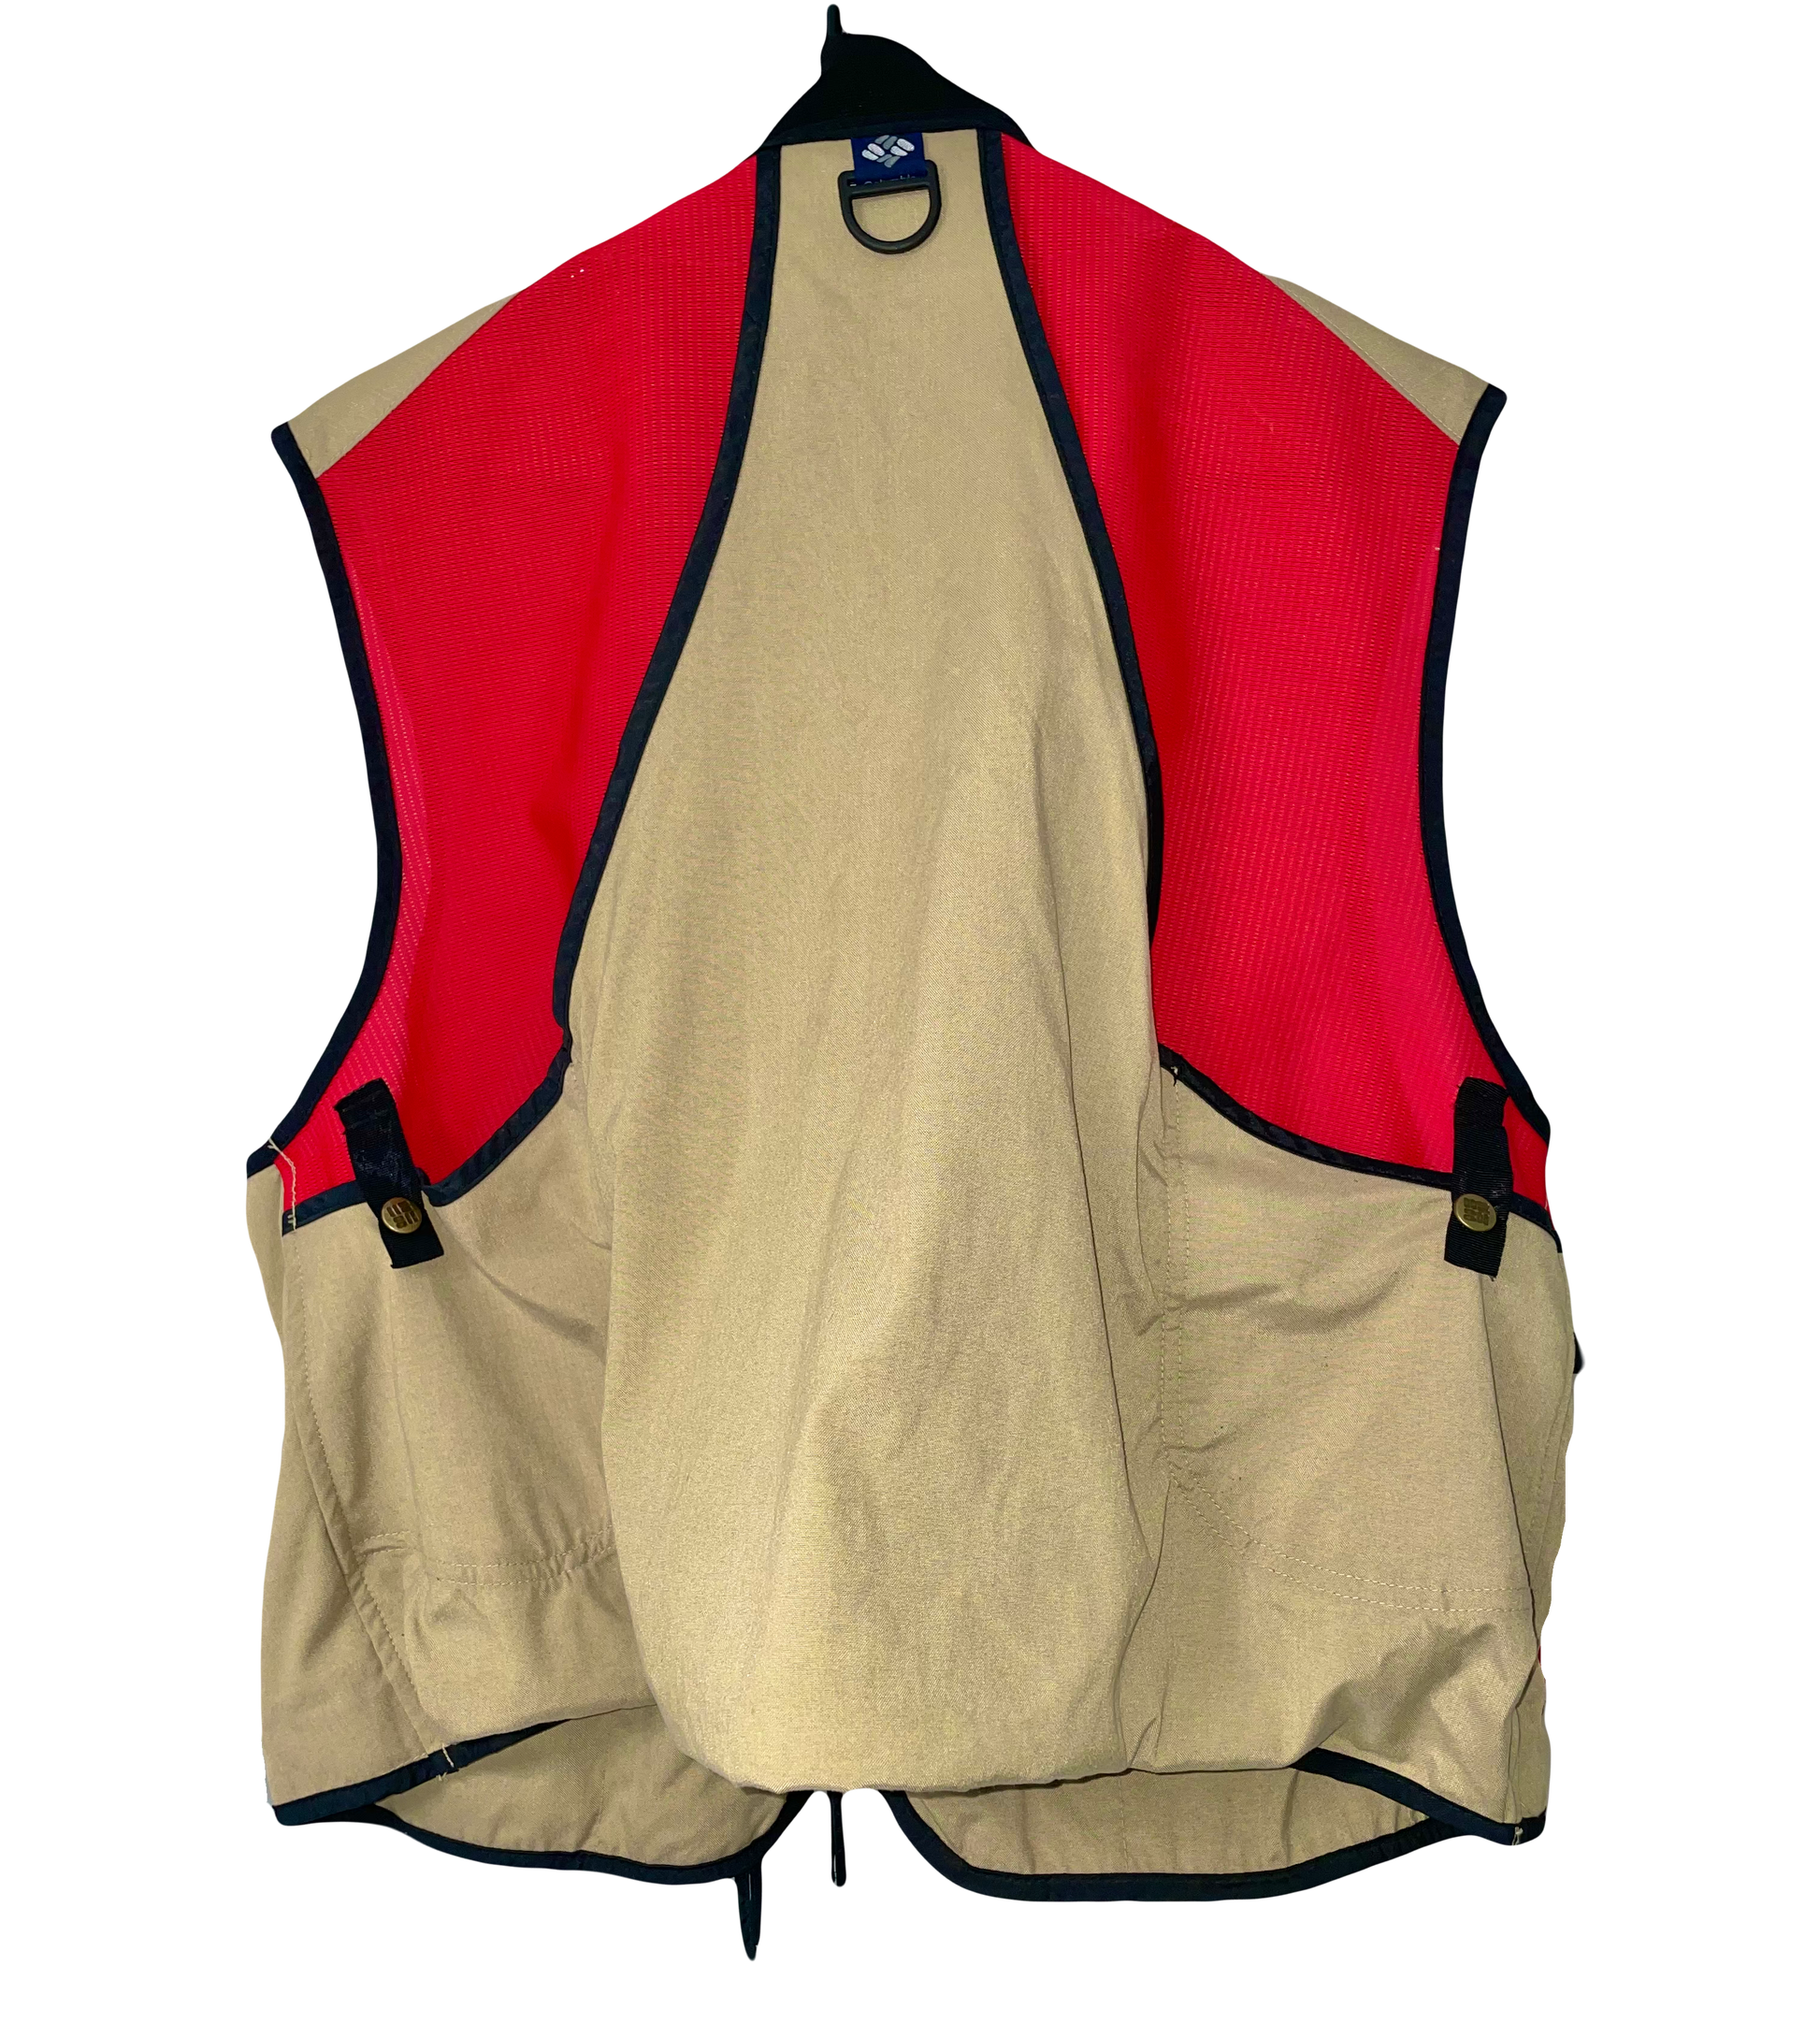 Columbia Premium Fly Fishing Vest in Rare Colorway [1980s, large